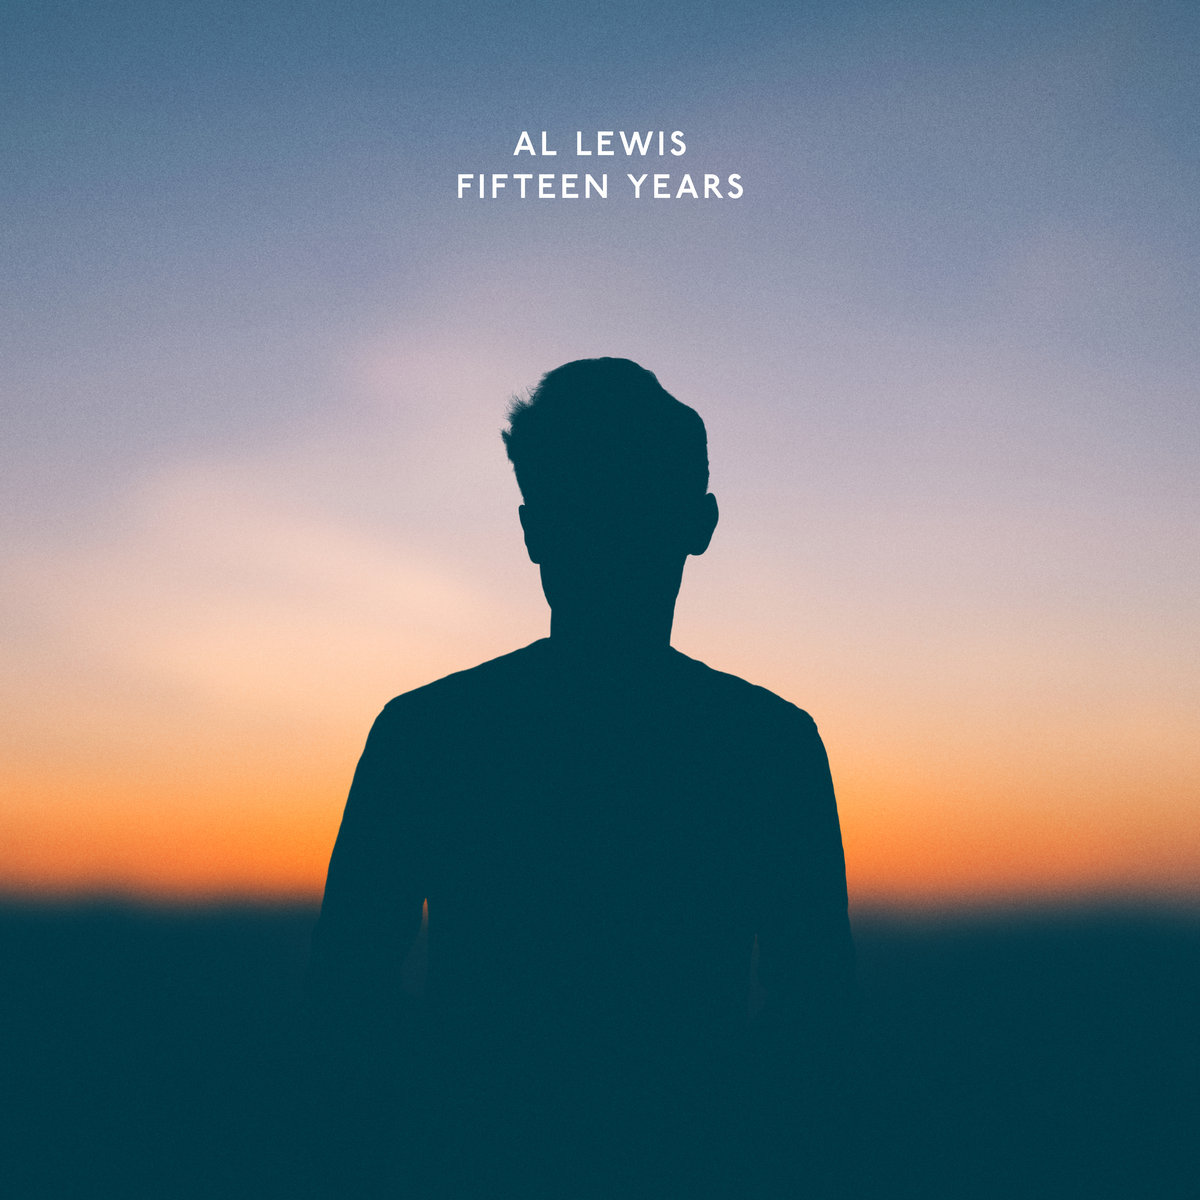 ALBUM REVIEW: Fifteen Years by Al Lewis